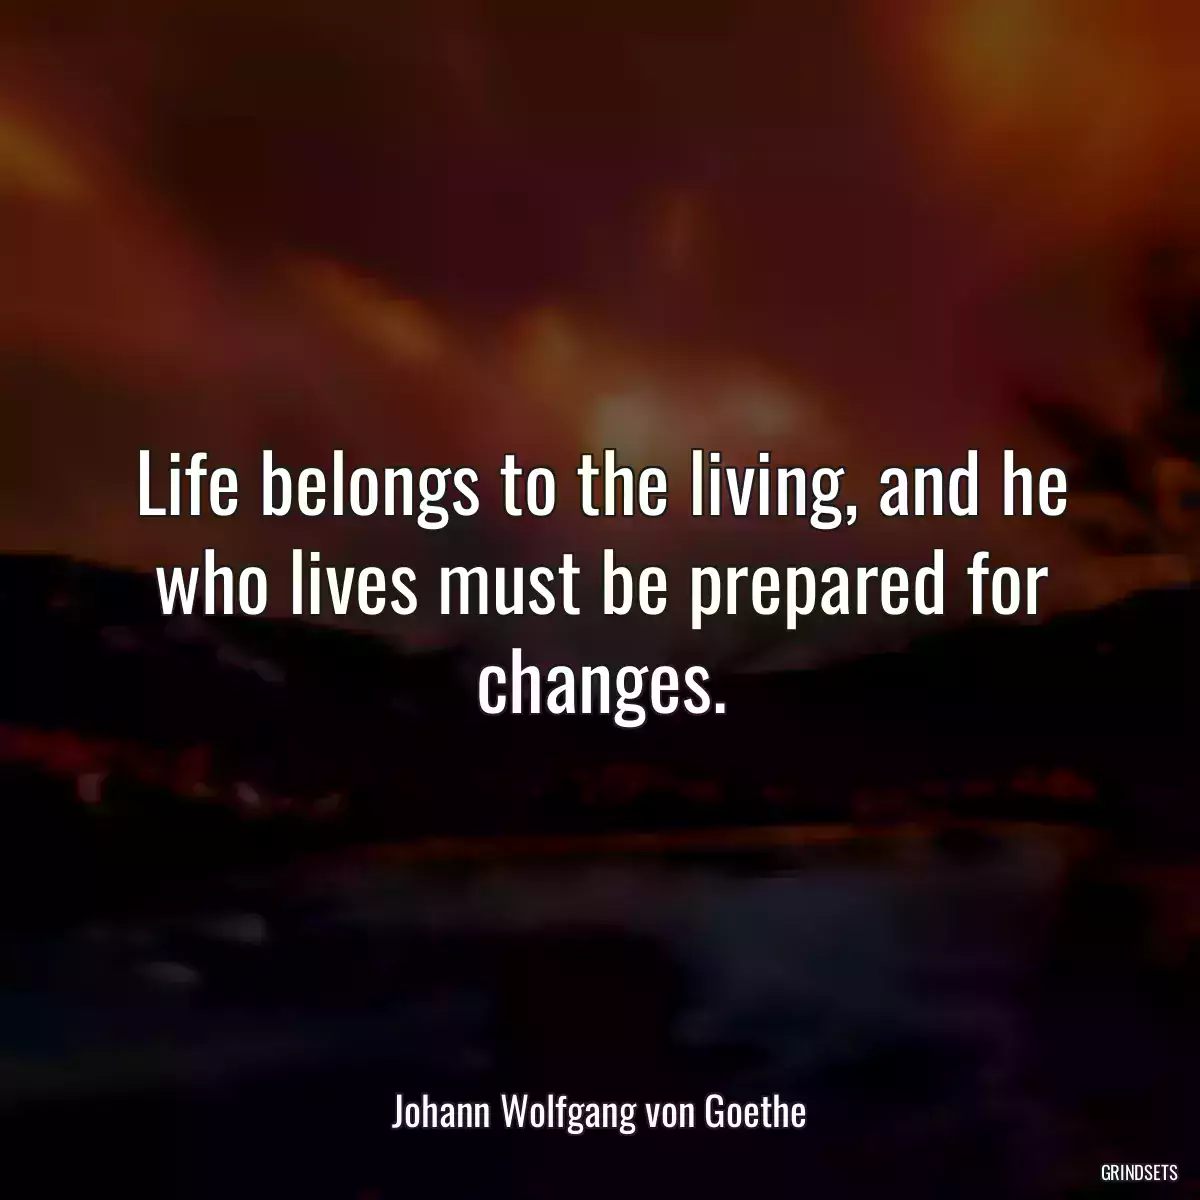 Life belongs to the living, and he who lives must be prepared for changes.